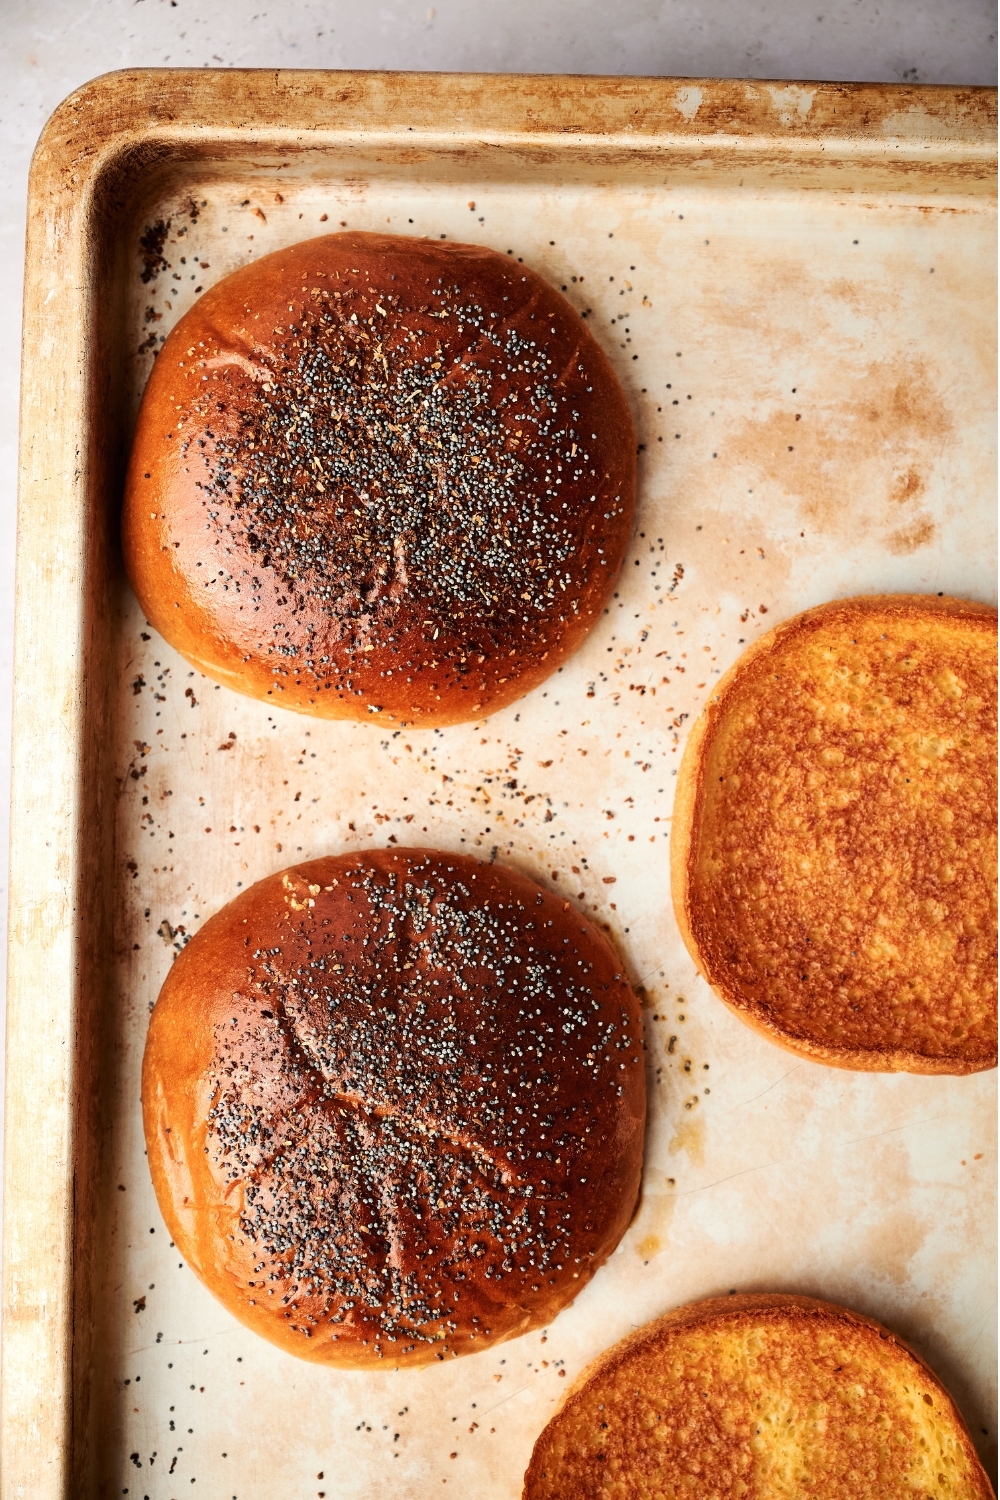 A baking sheet with toasted buns with sesame seeds and onions.